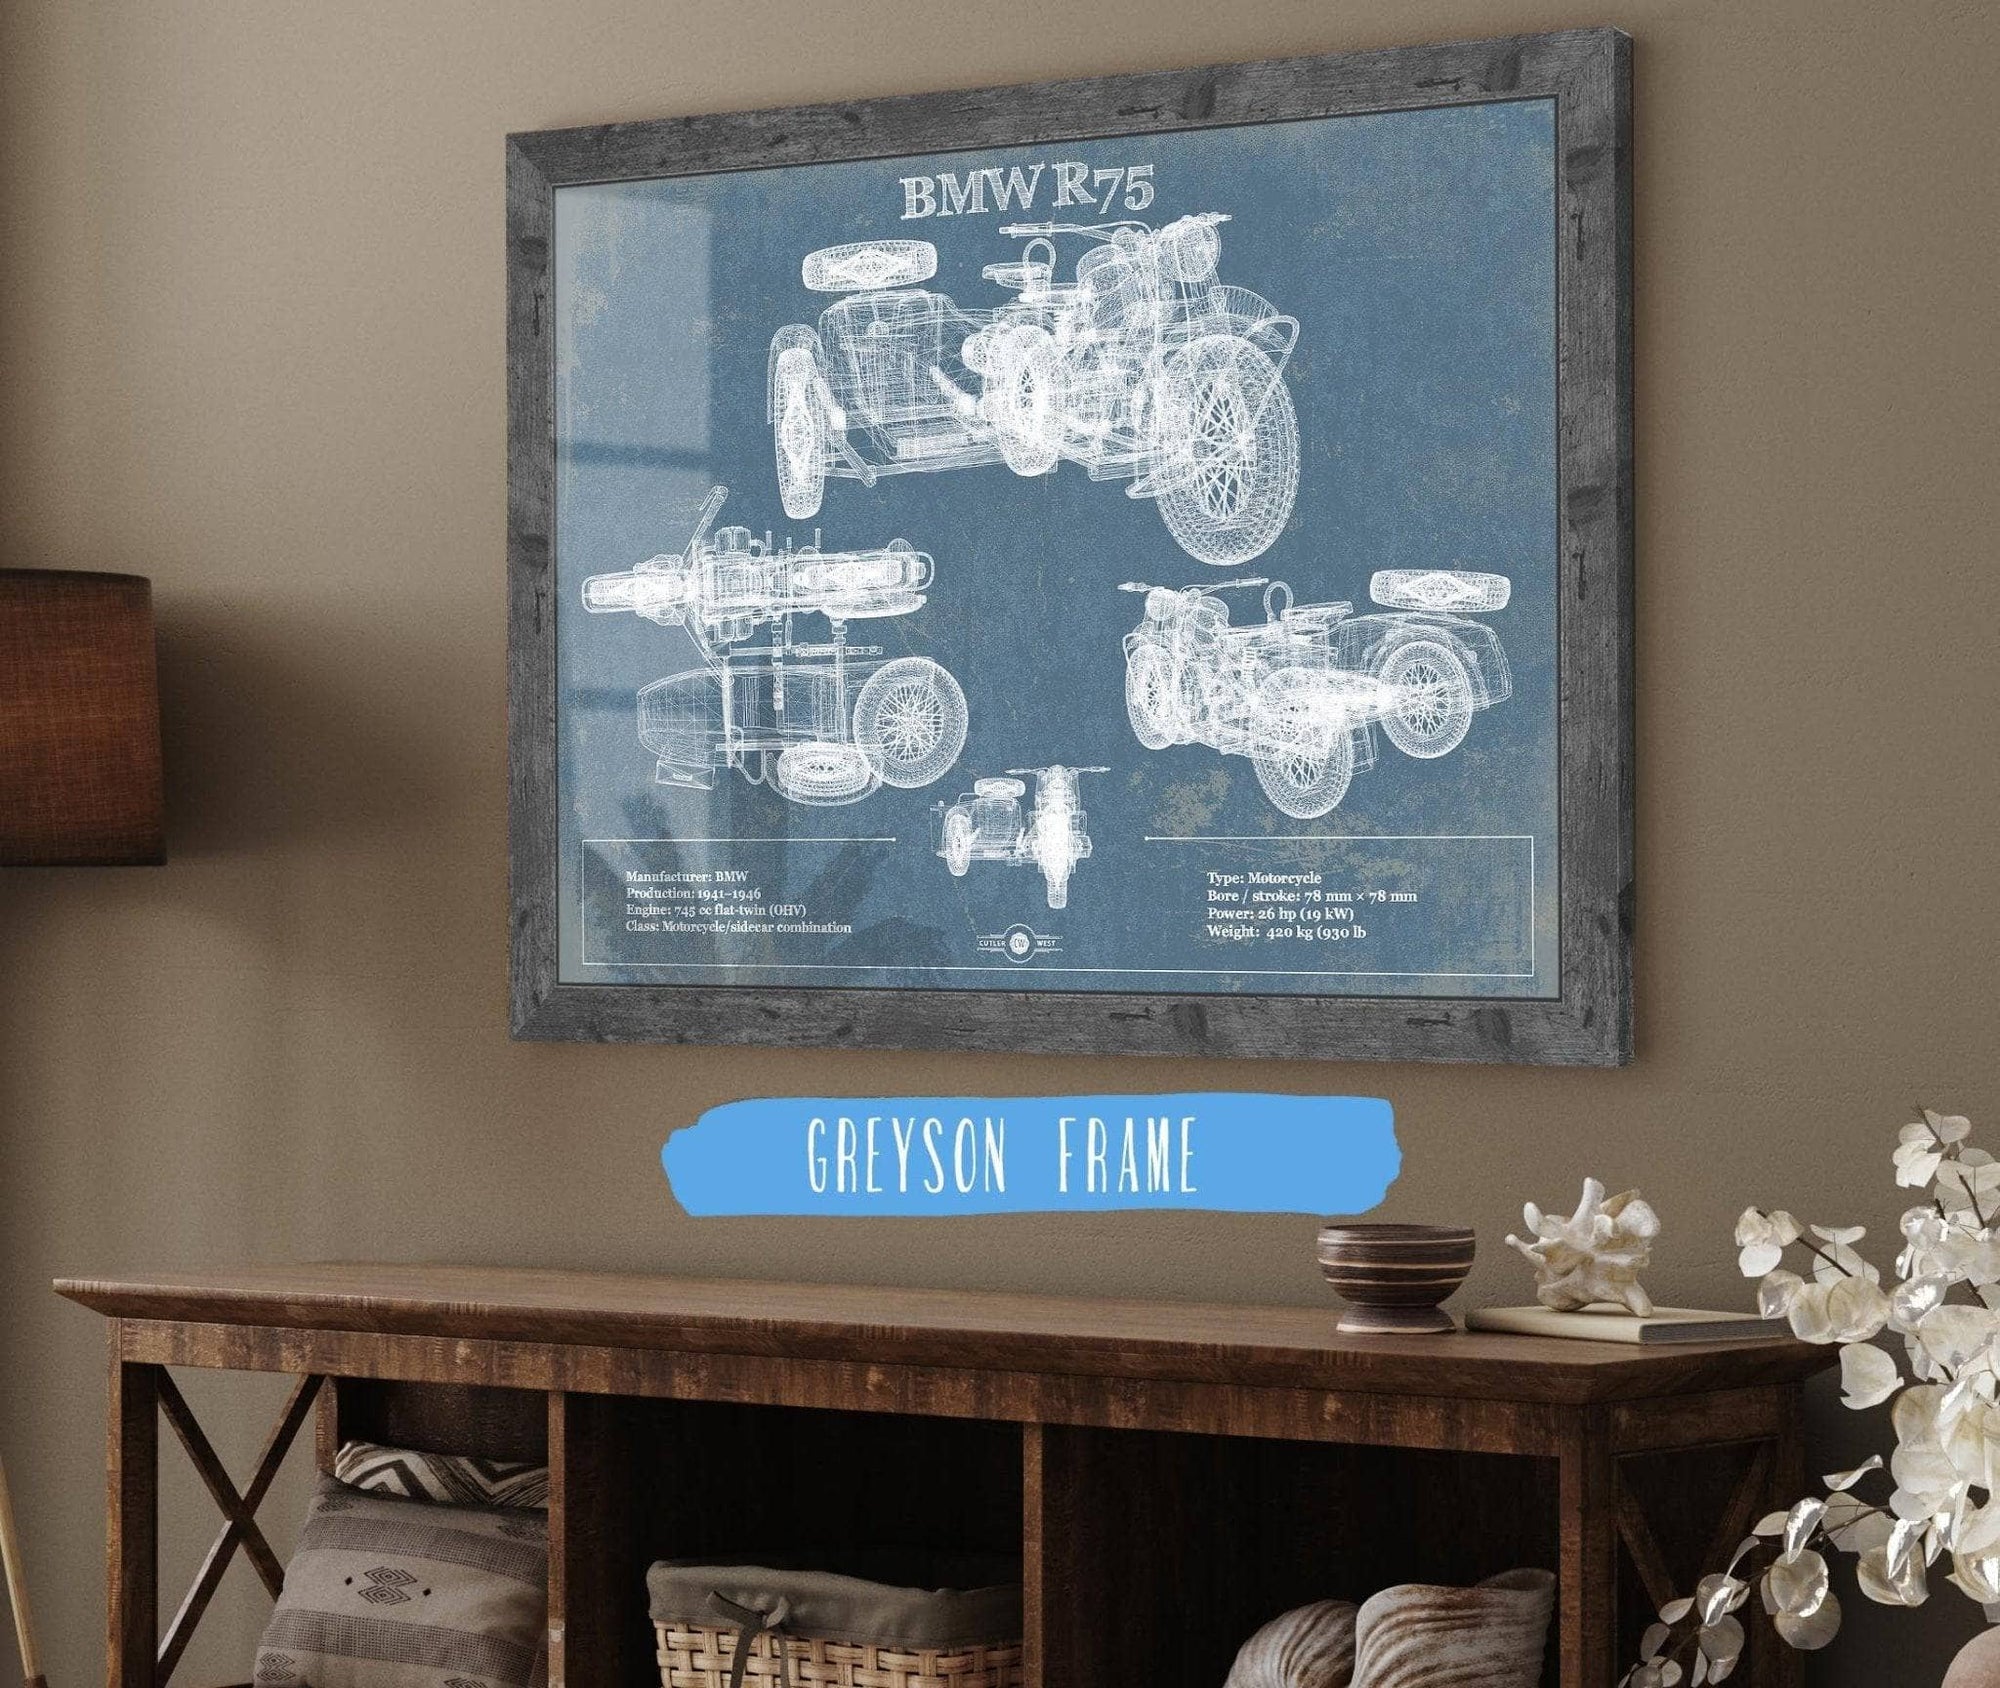 Cutler West Vehicle Collection 14" x 11" / Greyson Frame BMW R75 Blueprint Motorcycle Patent Print 833110058_47490